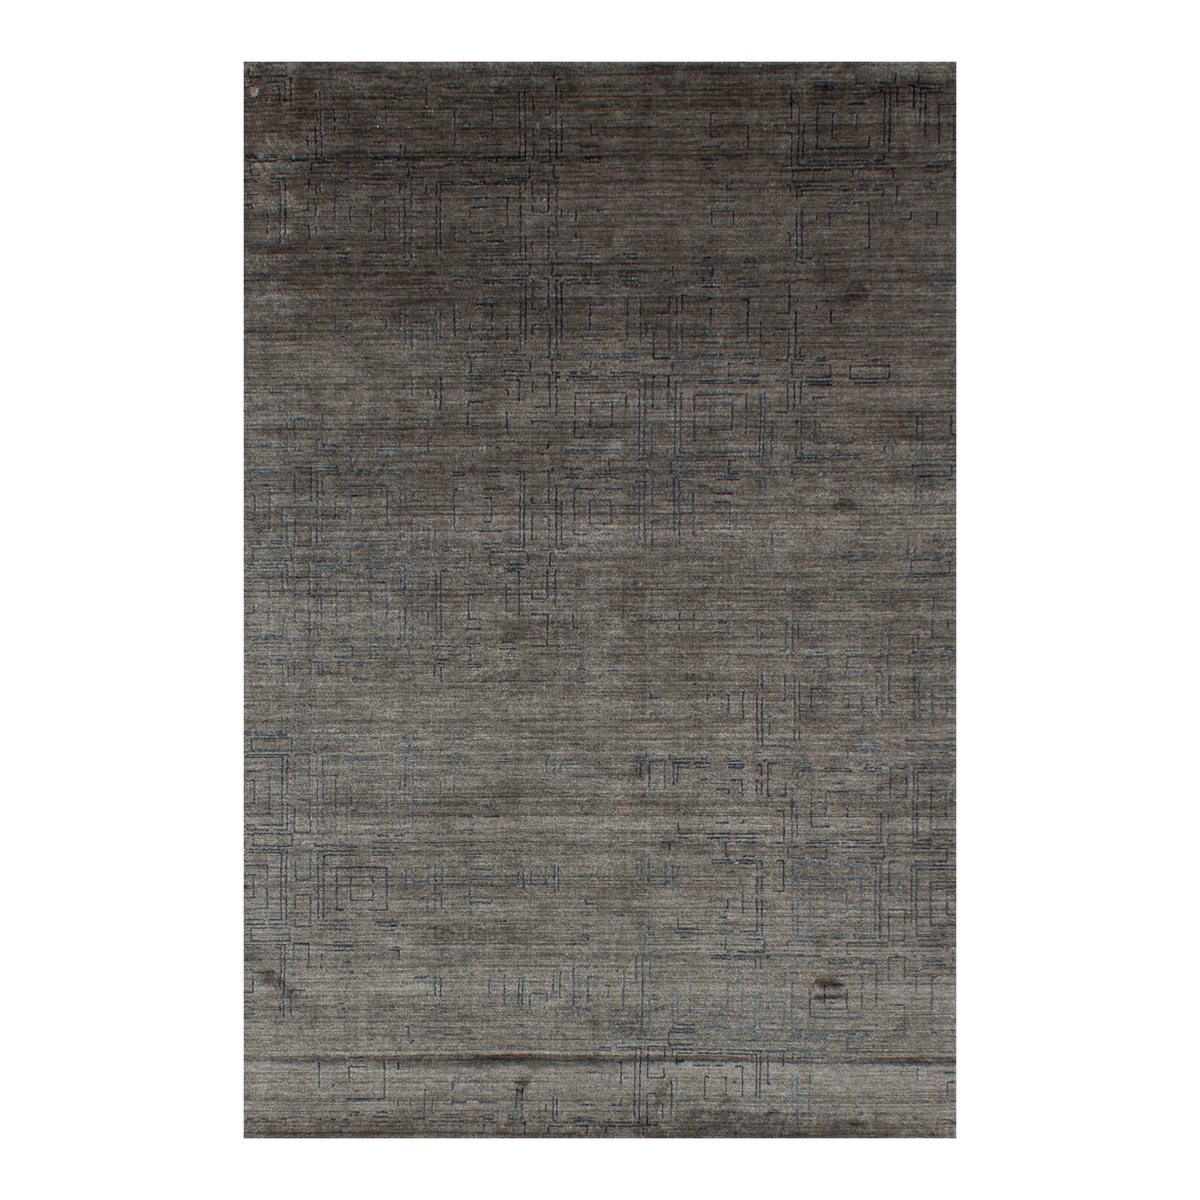 About the Modern Collection:A study in clean lines and geometric patterns bring a modern feel to these hand knotted rugs made from natural fibres of wool, banana, or bamboo silks.